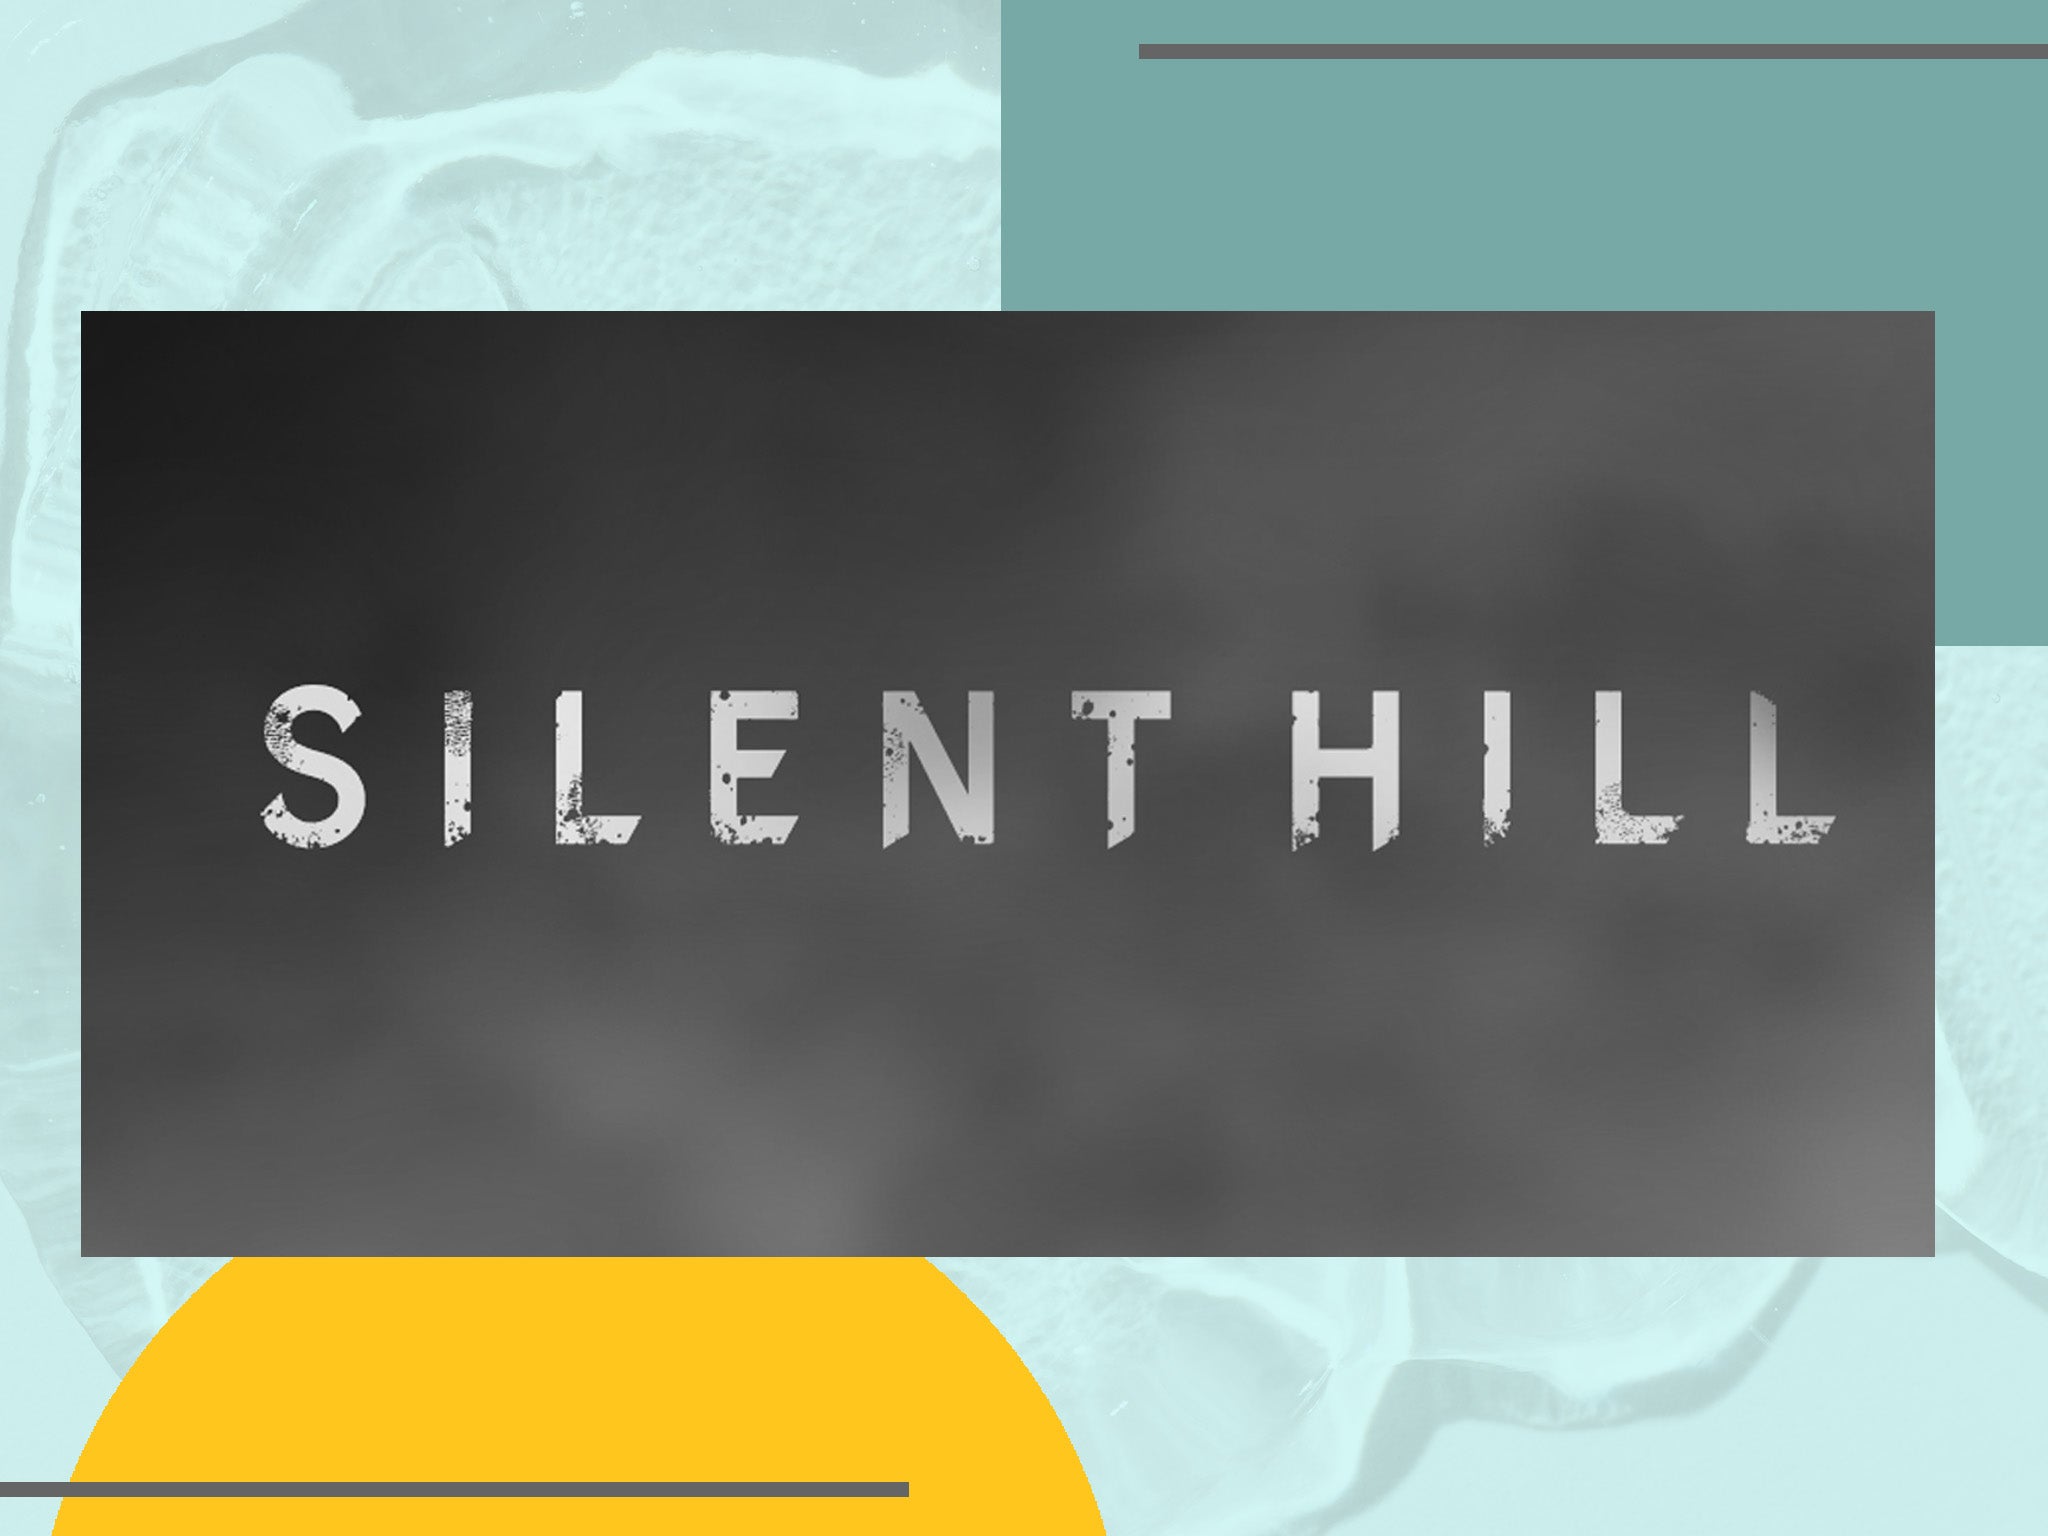 Games To Play If You Like The Silent Hill Series